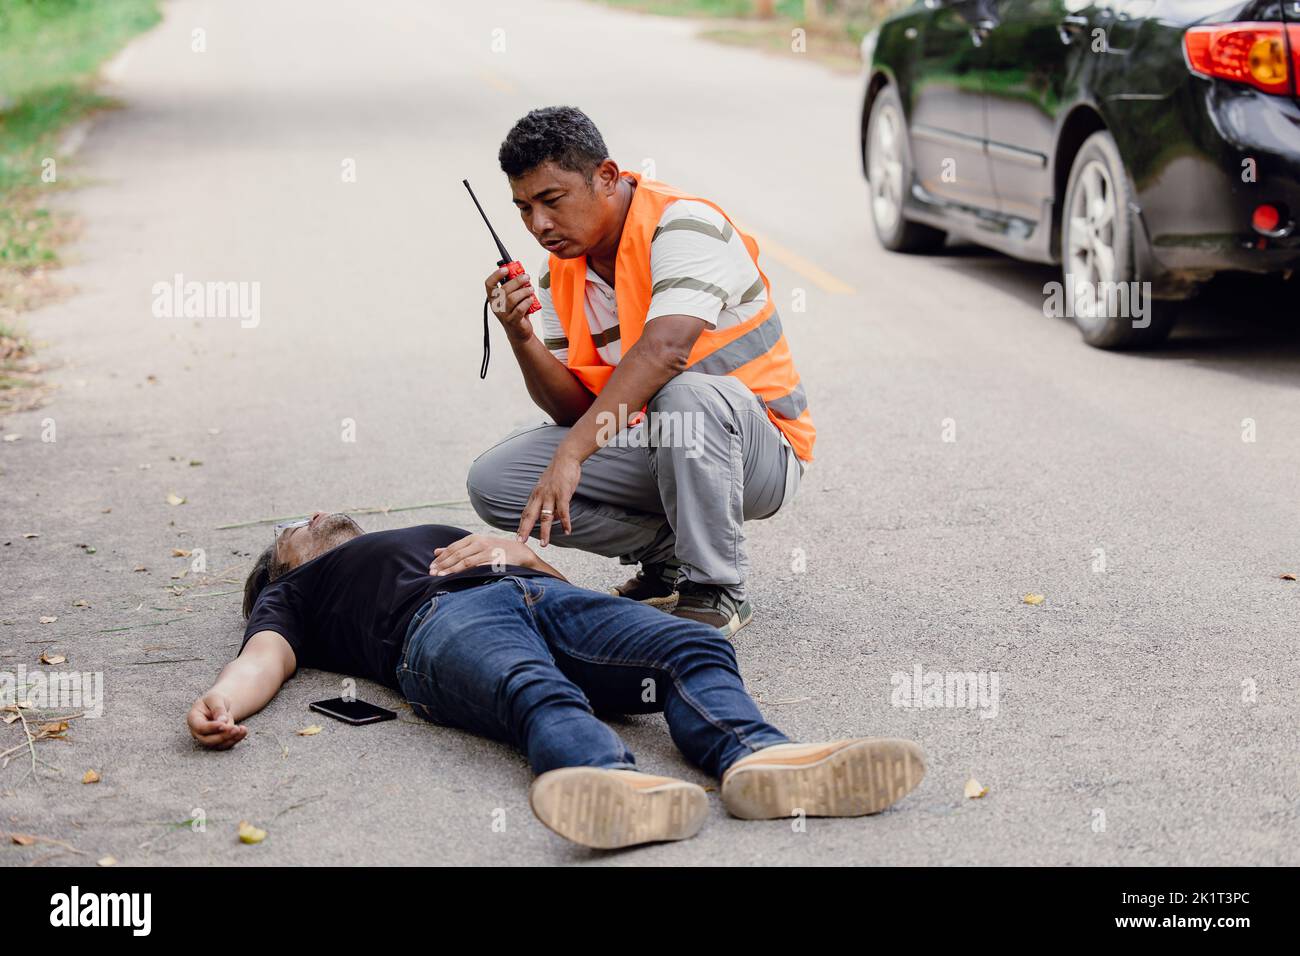 man accident lay down unconscious on the road hit by car during playing phone emergency team staff radio for help Stock Photo